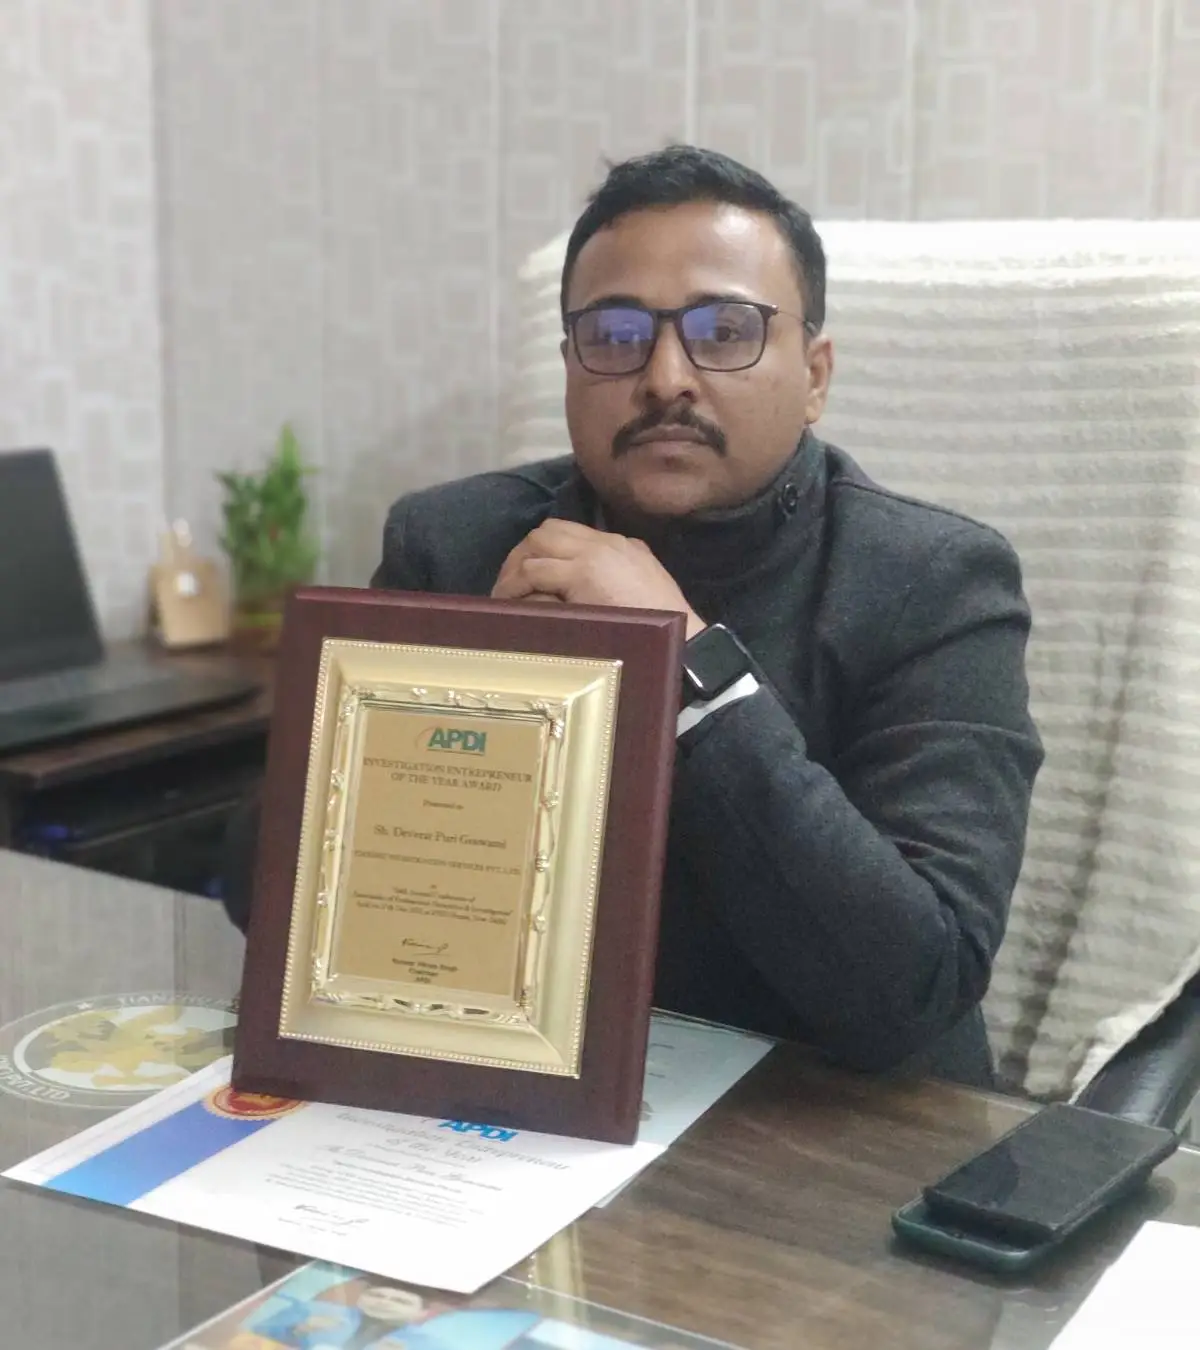 Owner collect awards for Doon Private detective agency in dehradun.